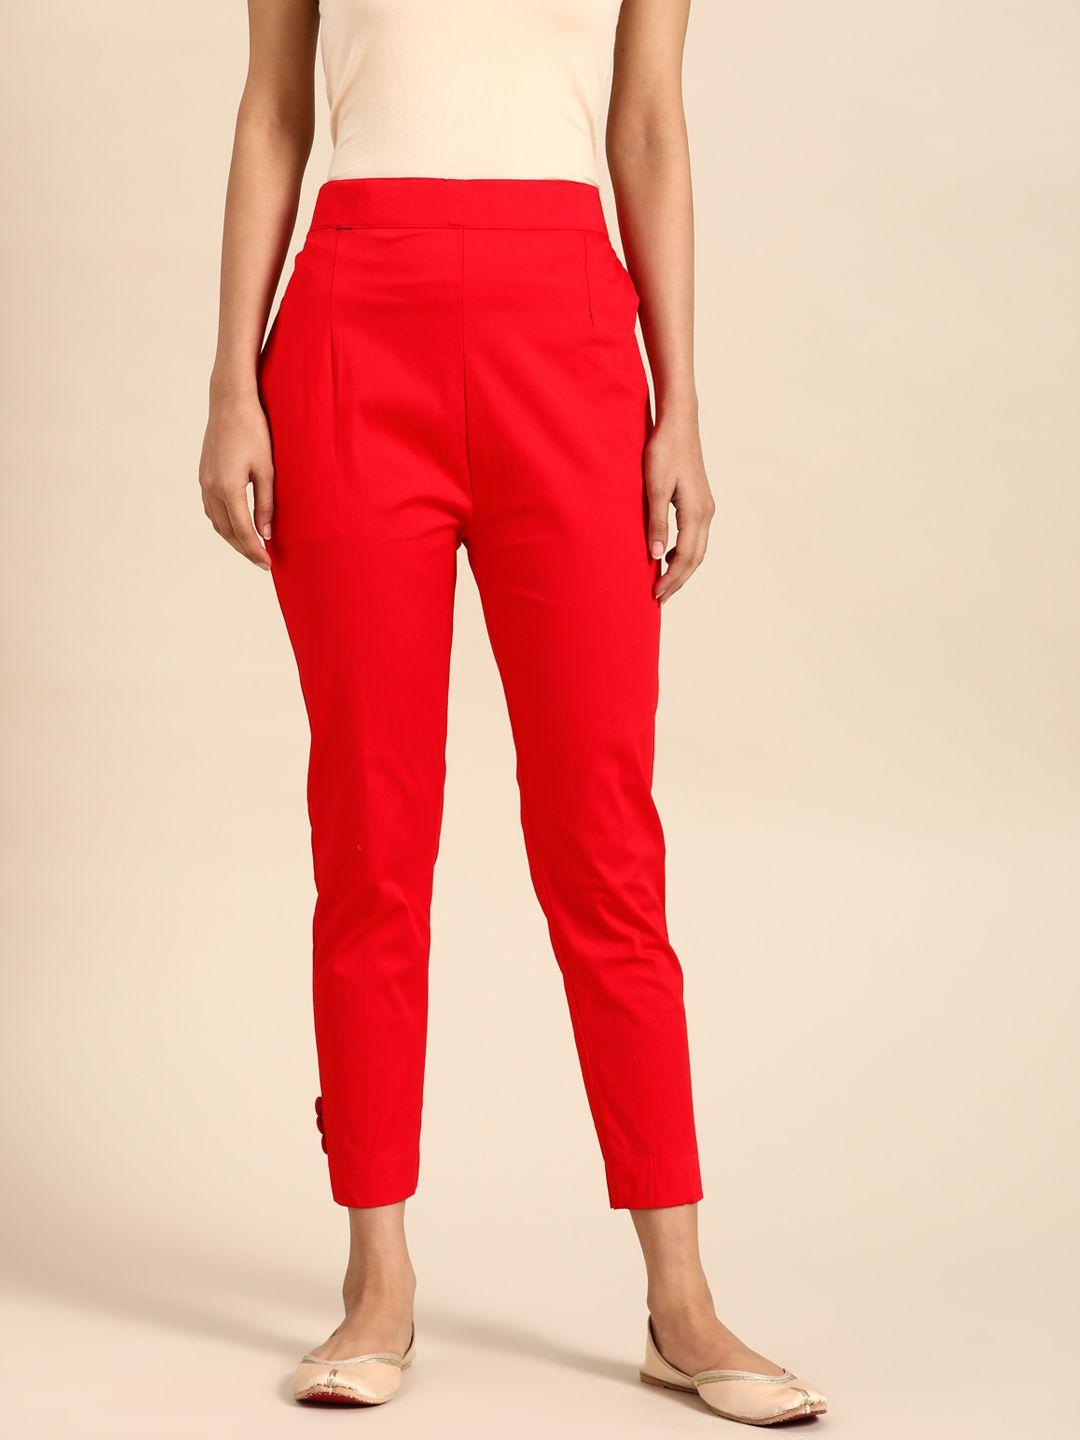 saadgi women red comfort high-rise easy wash cropped cotton cigerette trousers